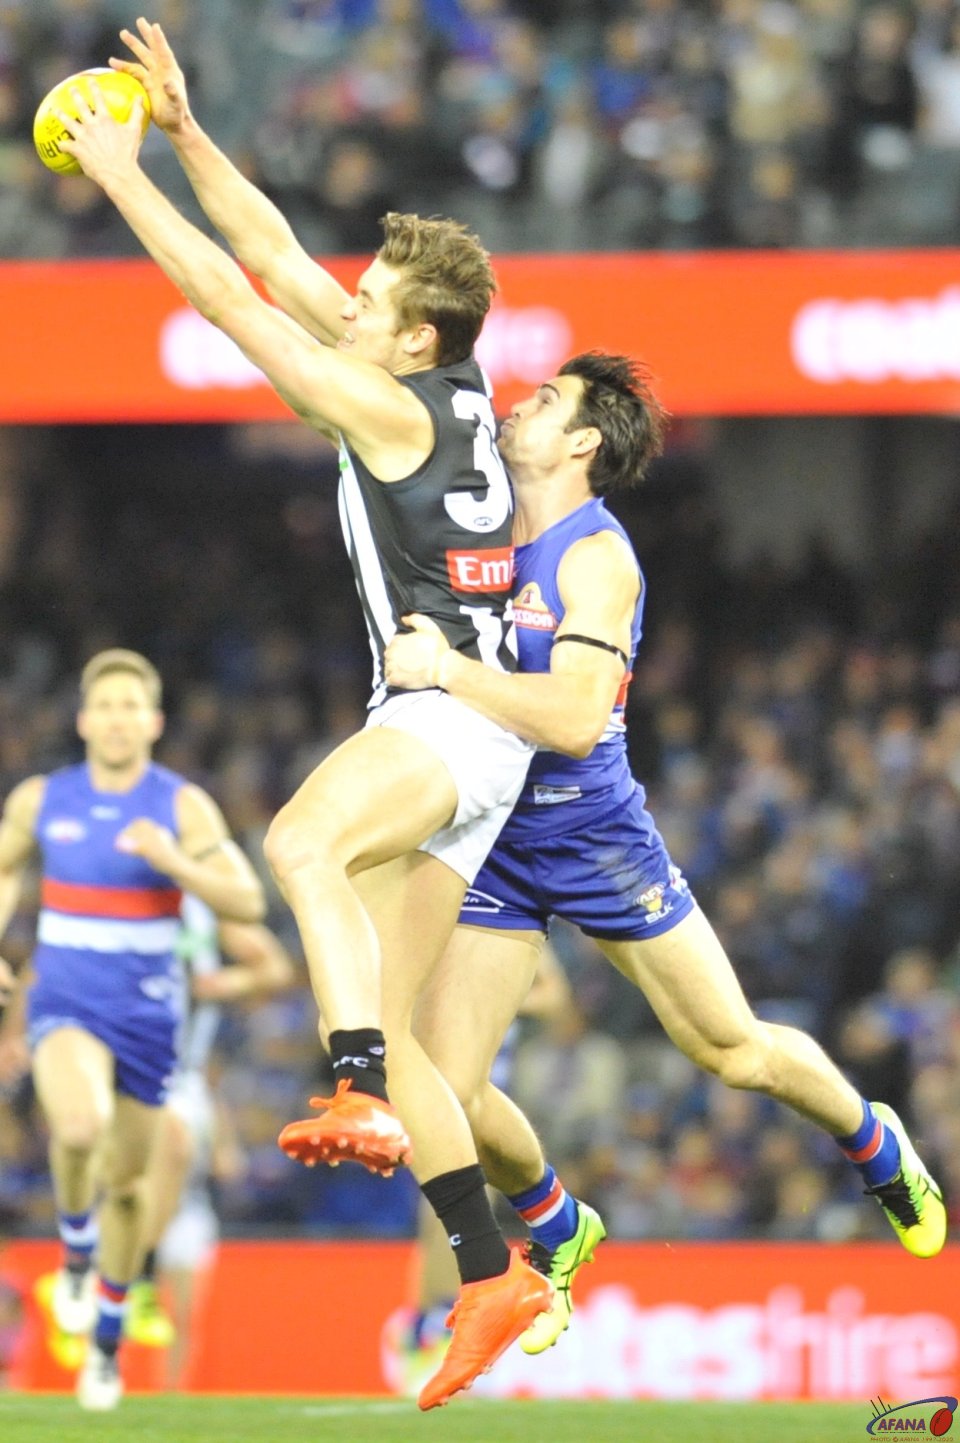 Easton Wood is just unable to spoil the Darcy Moore mark